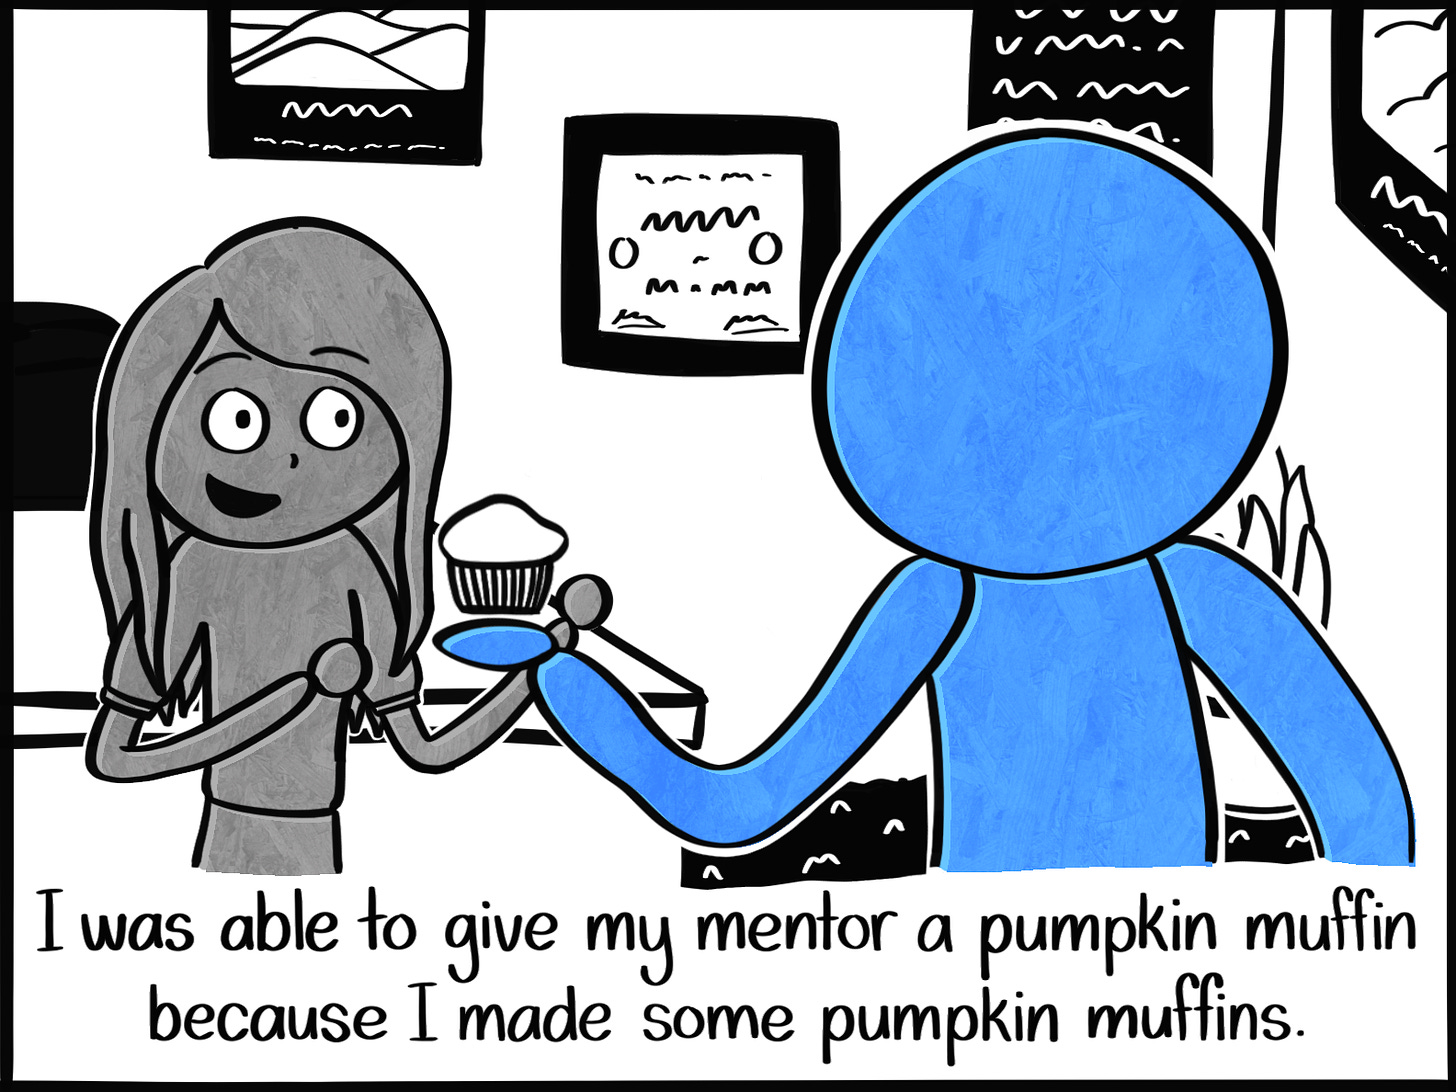 Caption: I was able to give my mentor a pumpkin muffin because I made some pumpkin muffins. Image: Blue person handing a woman a muffin. They both appear to be in the woman's office.